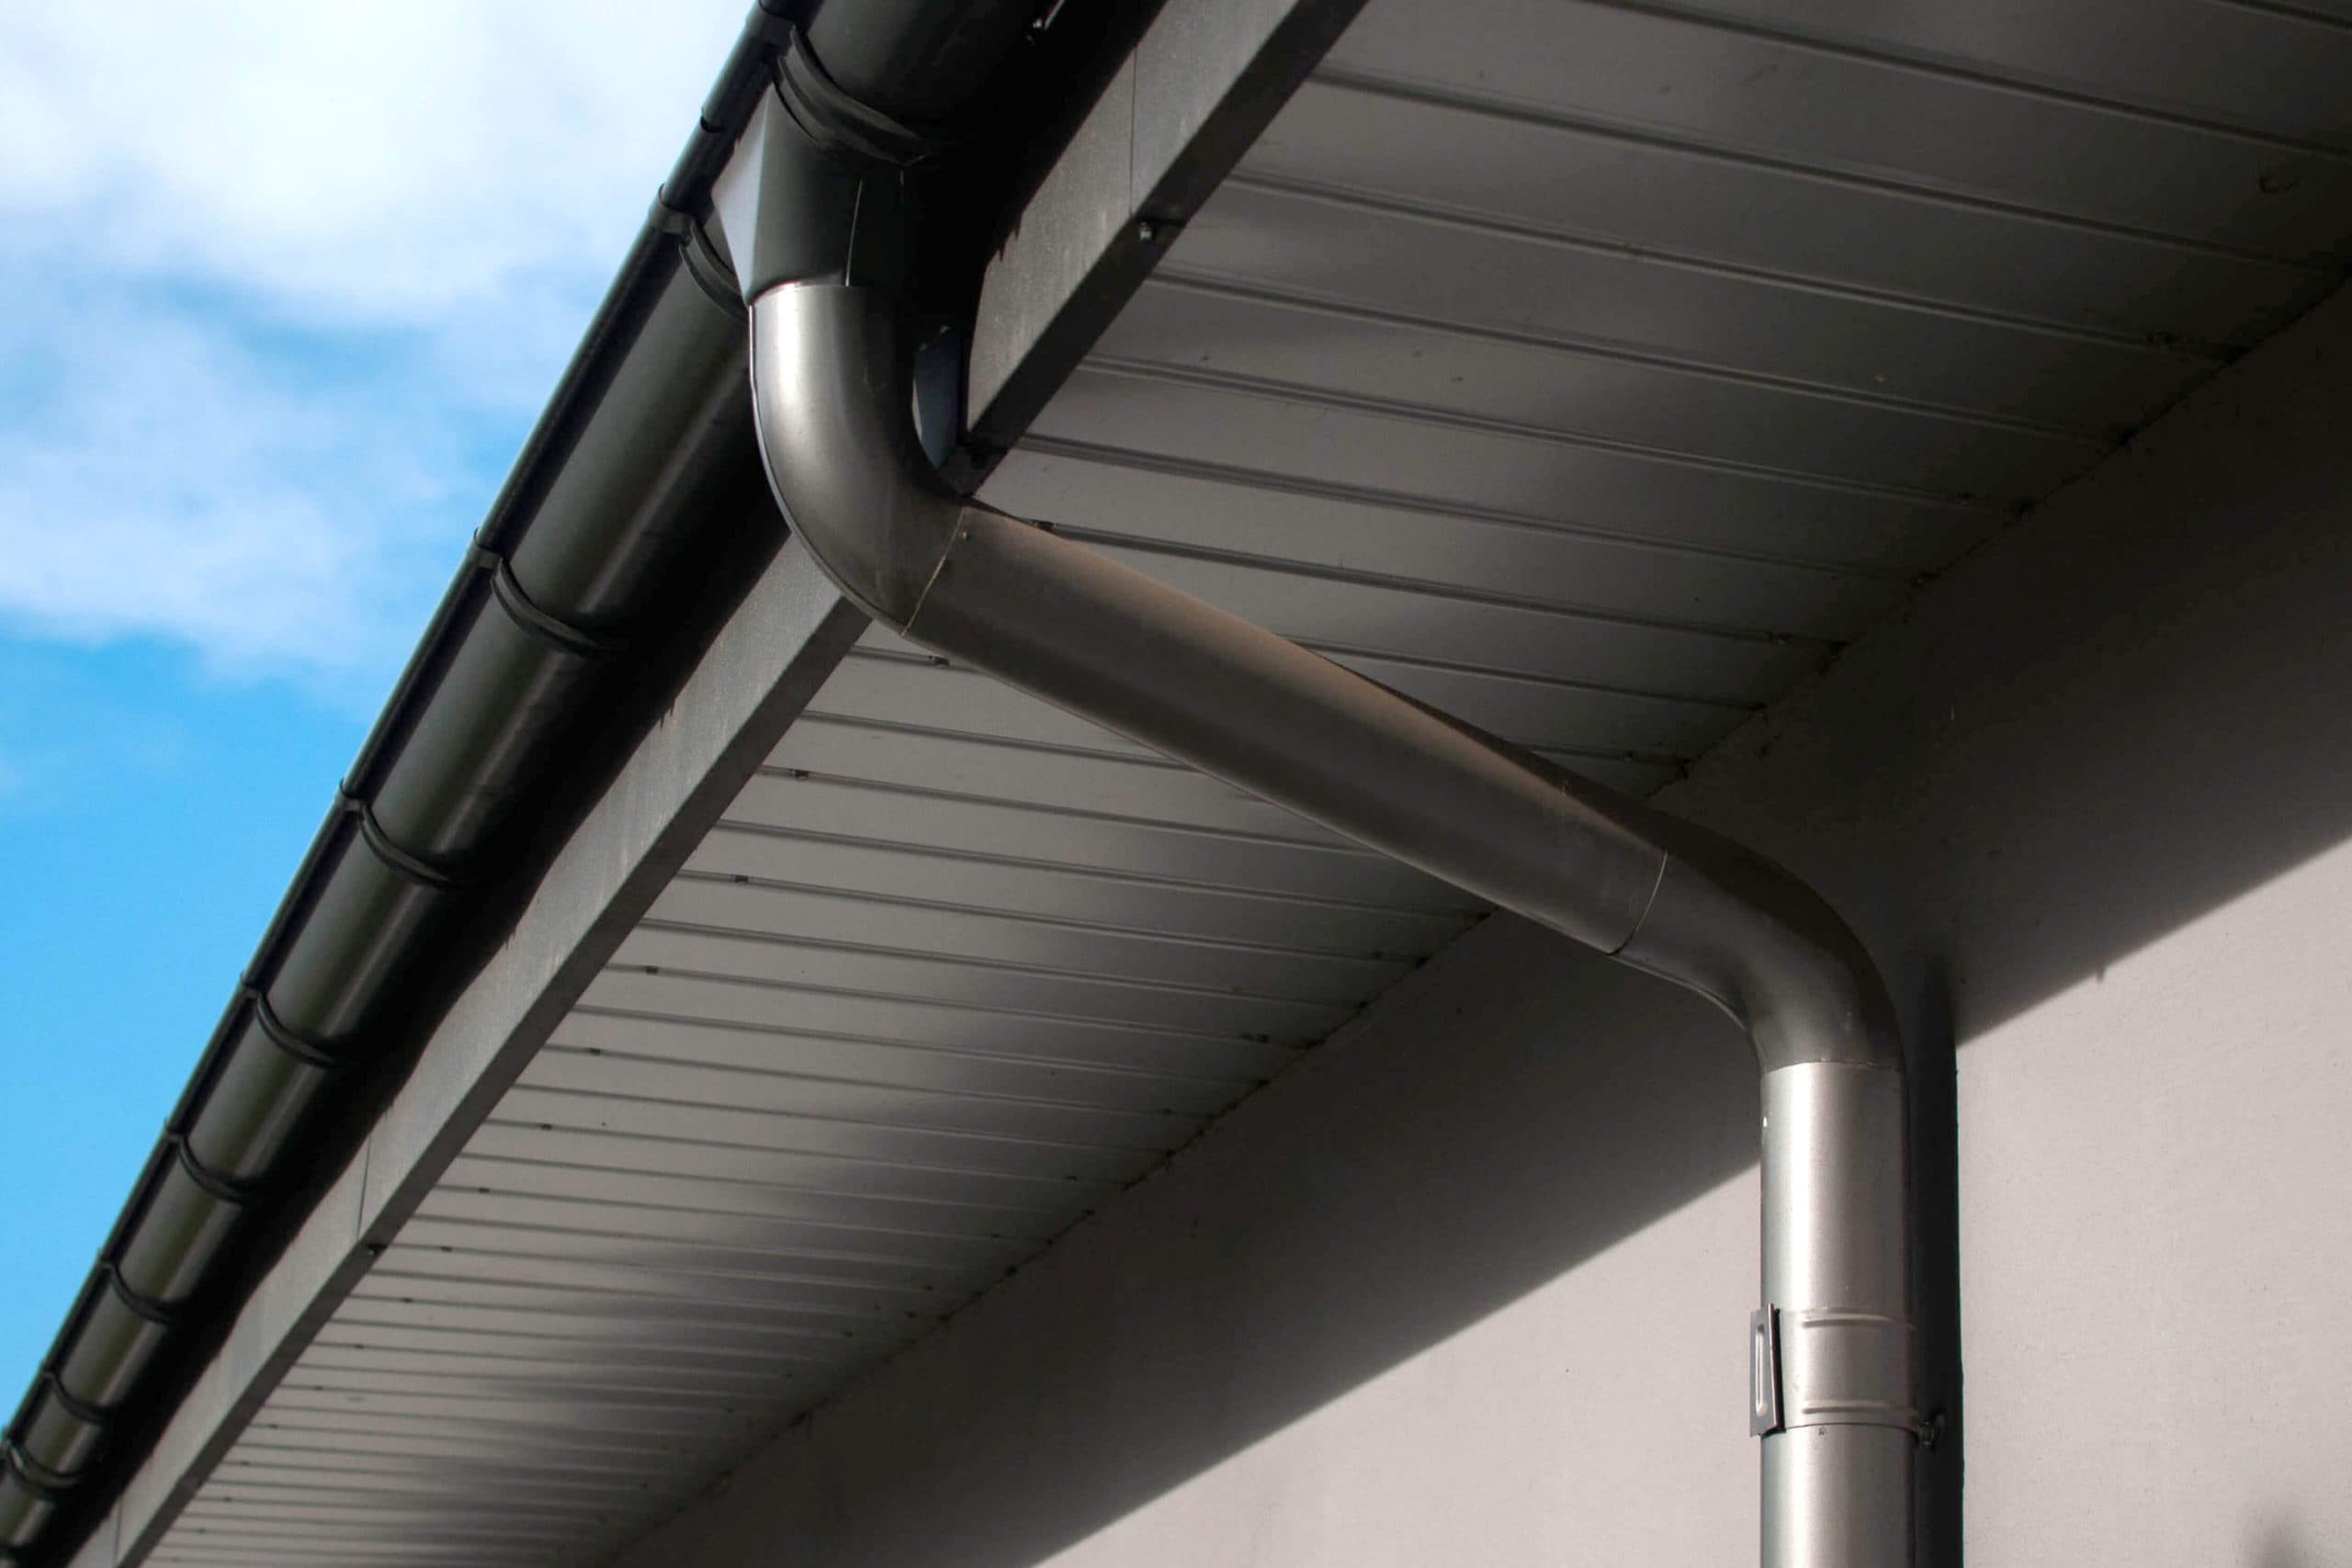 Reliable and affordable Galvanized gutters installation in Marietta